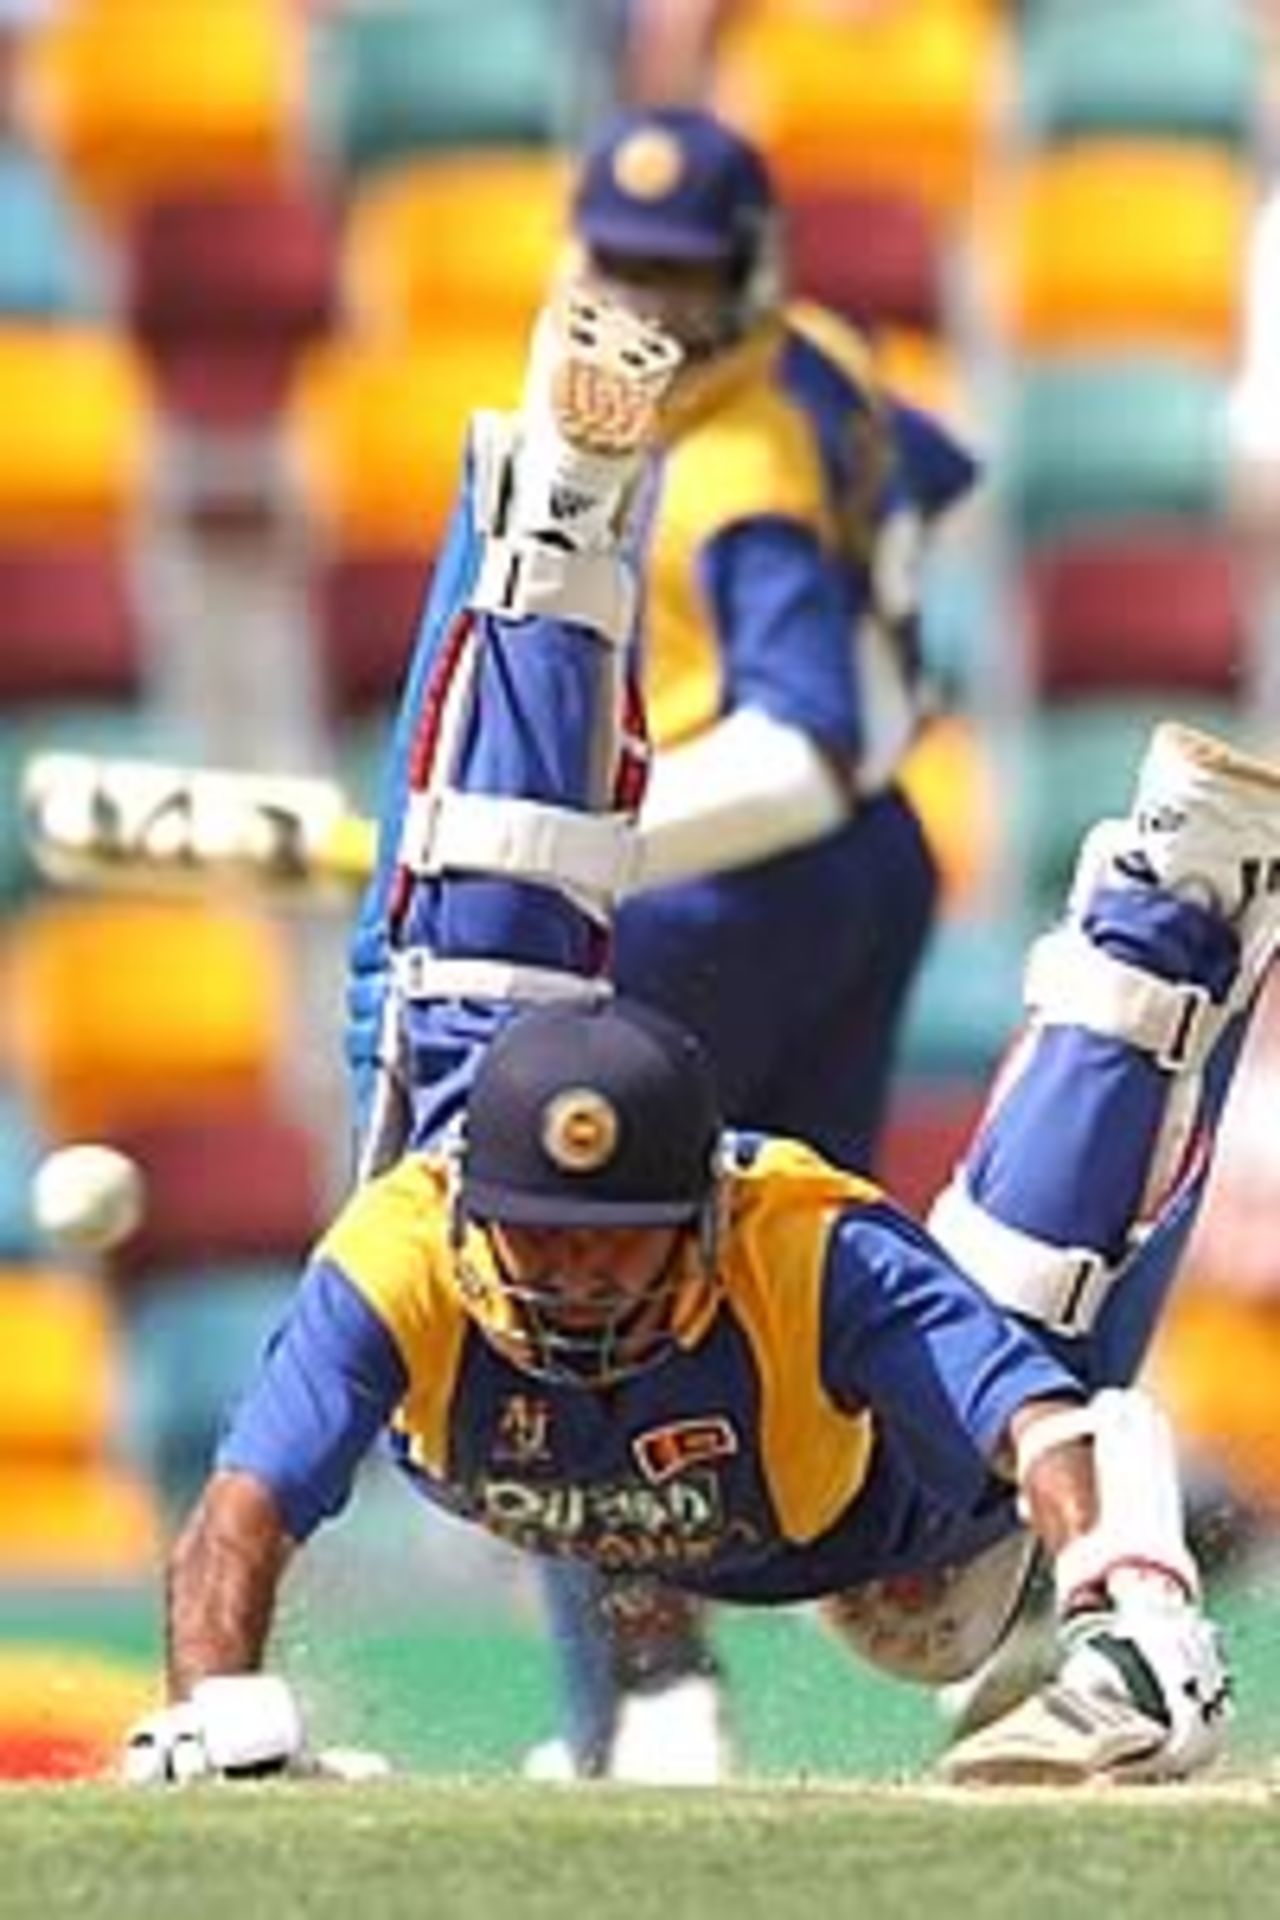 BRISBANE - JANUARY 15: Marvan Atapattu of Sri Lanka dives for his crease to survive a run out attempt during the One Day International match between Australia and Sri Lanka at the Gabba in Brisbane, Australia on January 15, 2003.